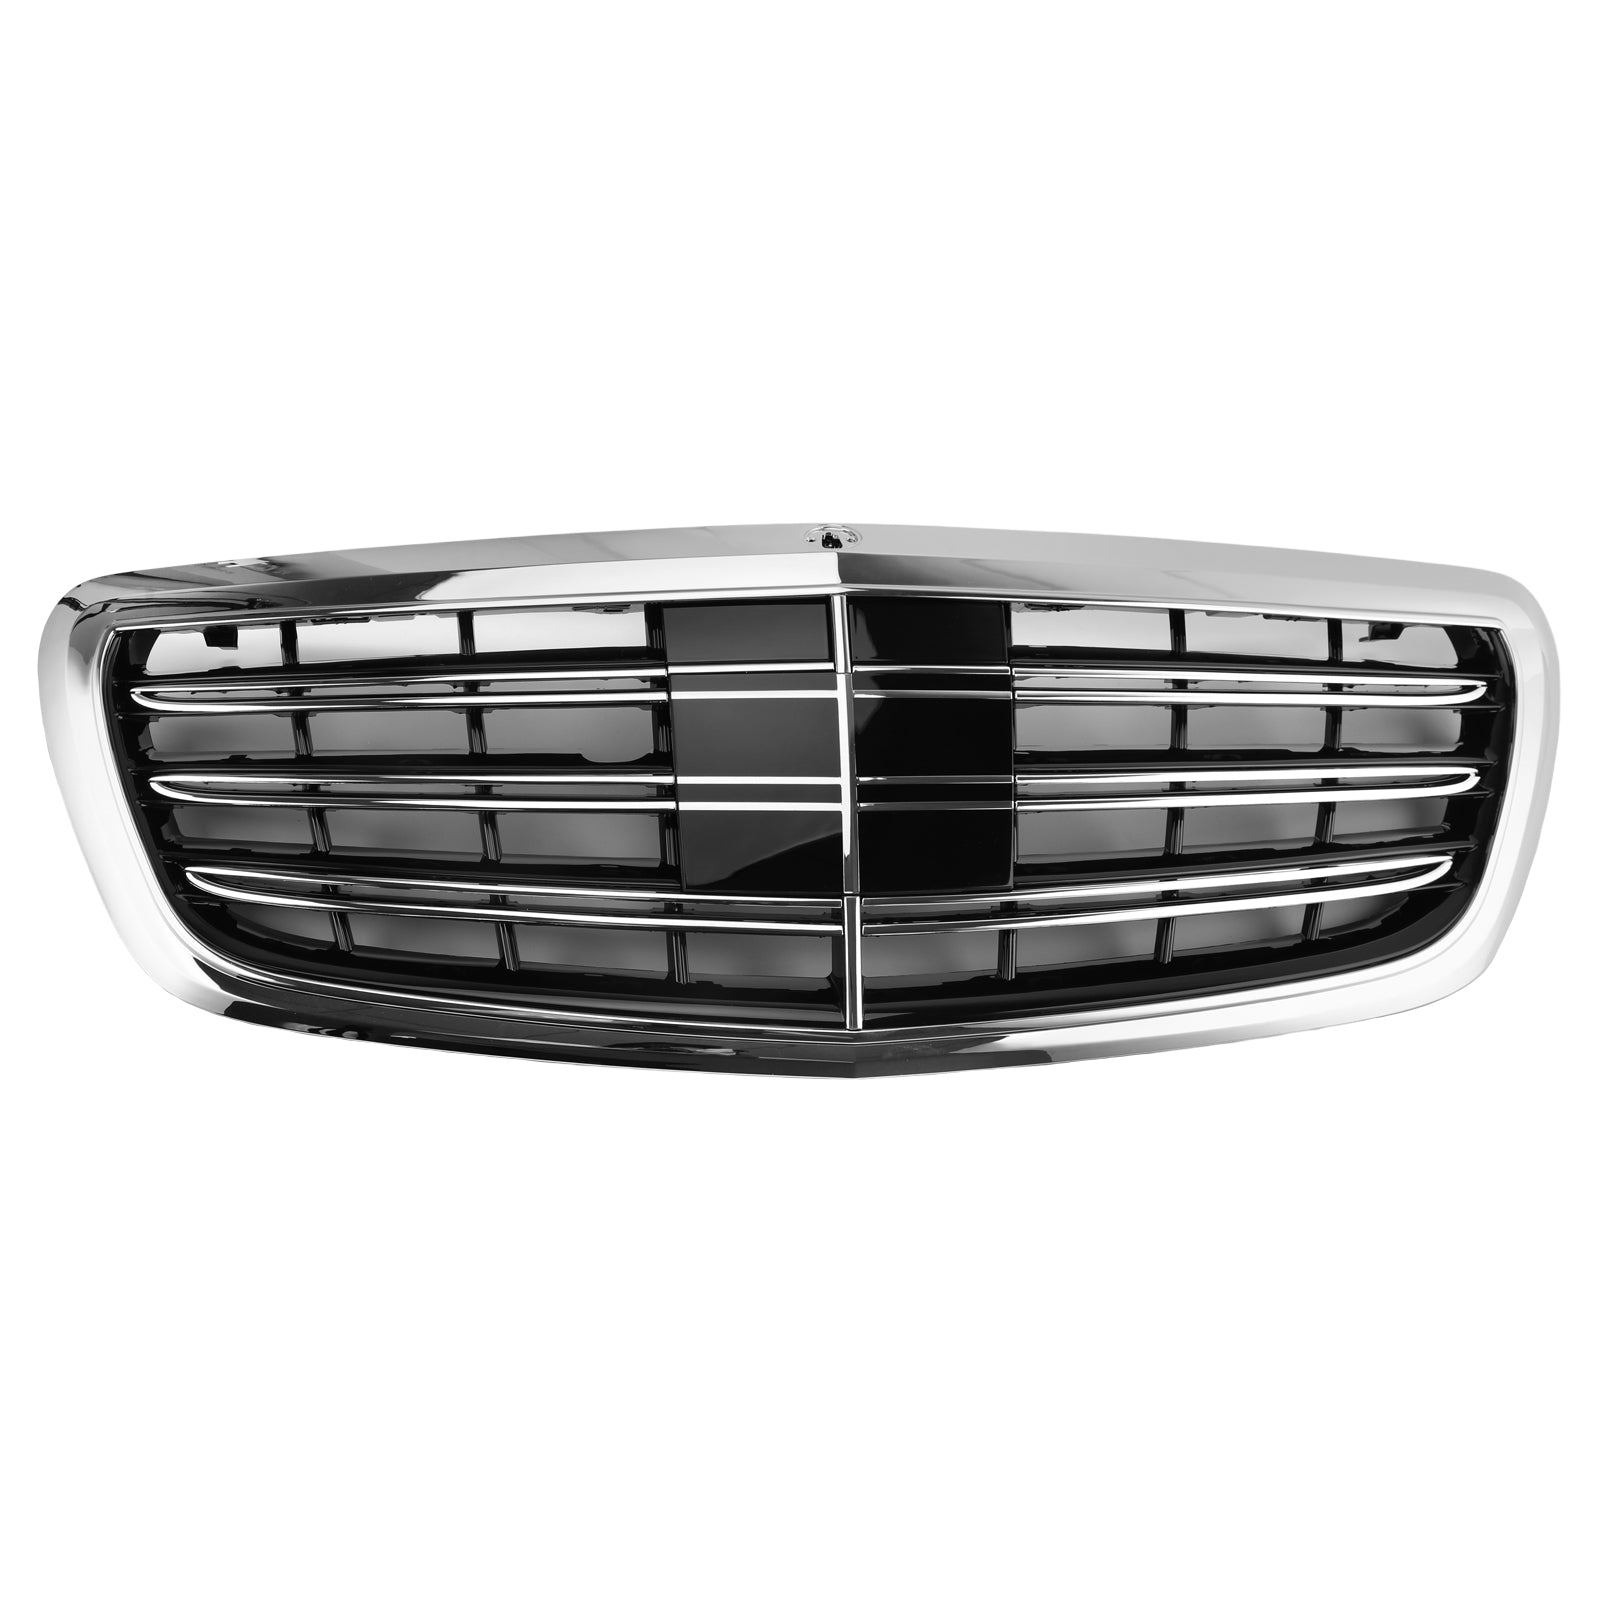 Mercedes Benz 2018-2021 W222 S-Class Facelift S65 AMG Style A2229068802 Body Kit Front Rear Bumper - 0